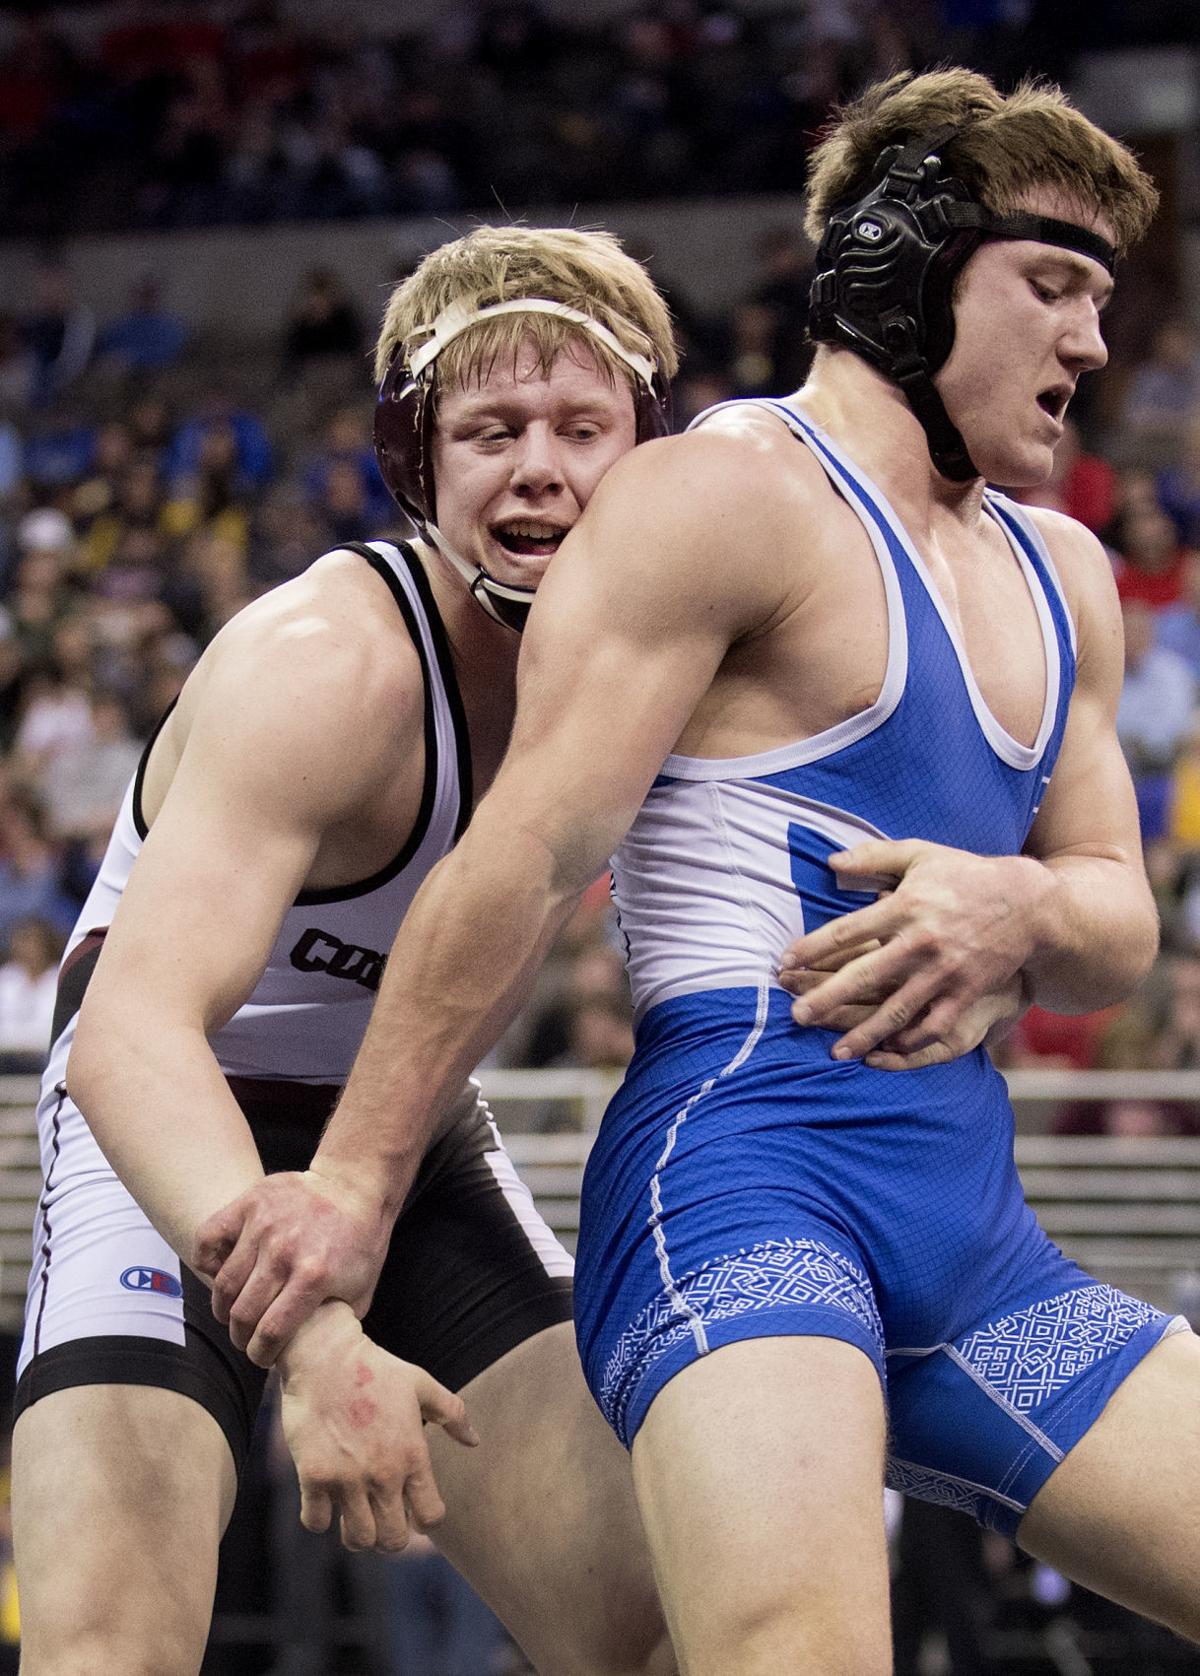 Photos Action From The State Wrestling Semifinals High School